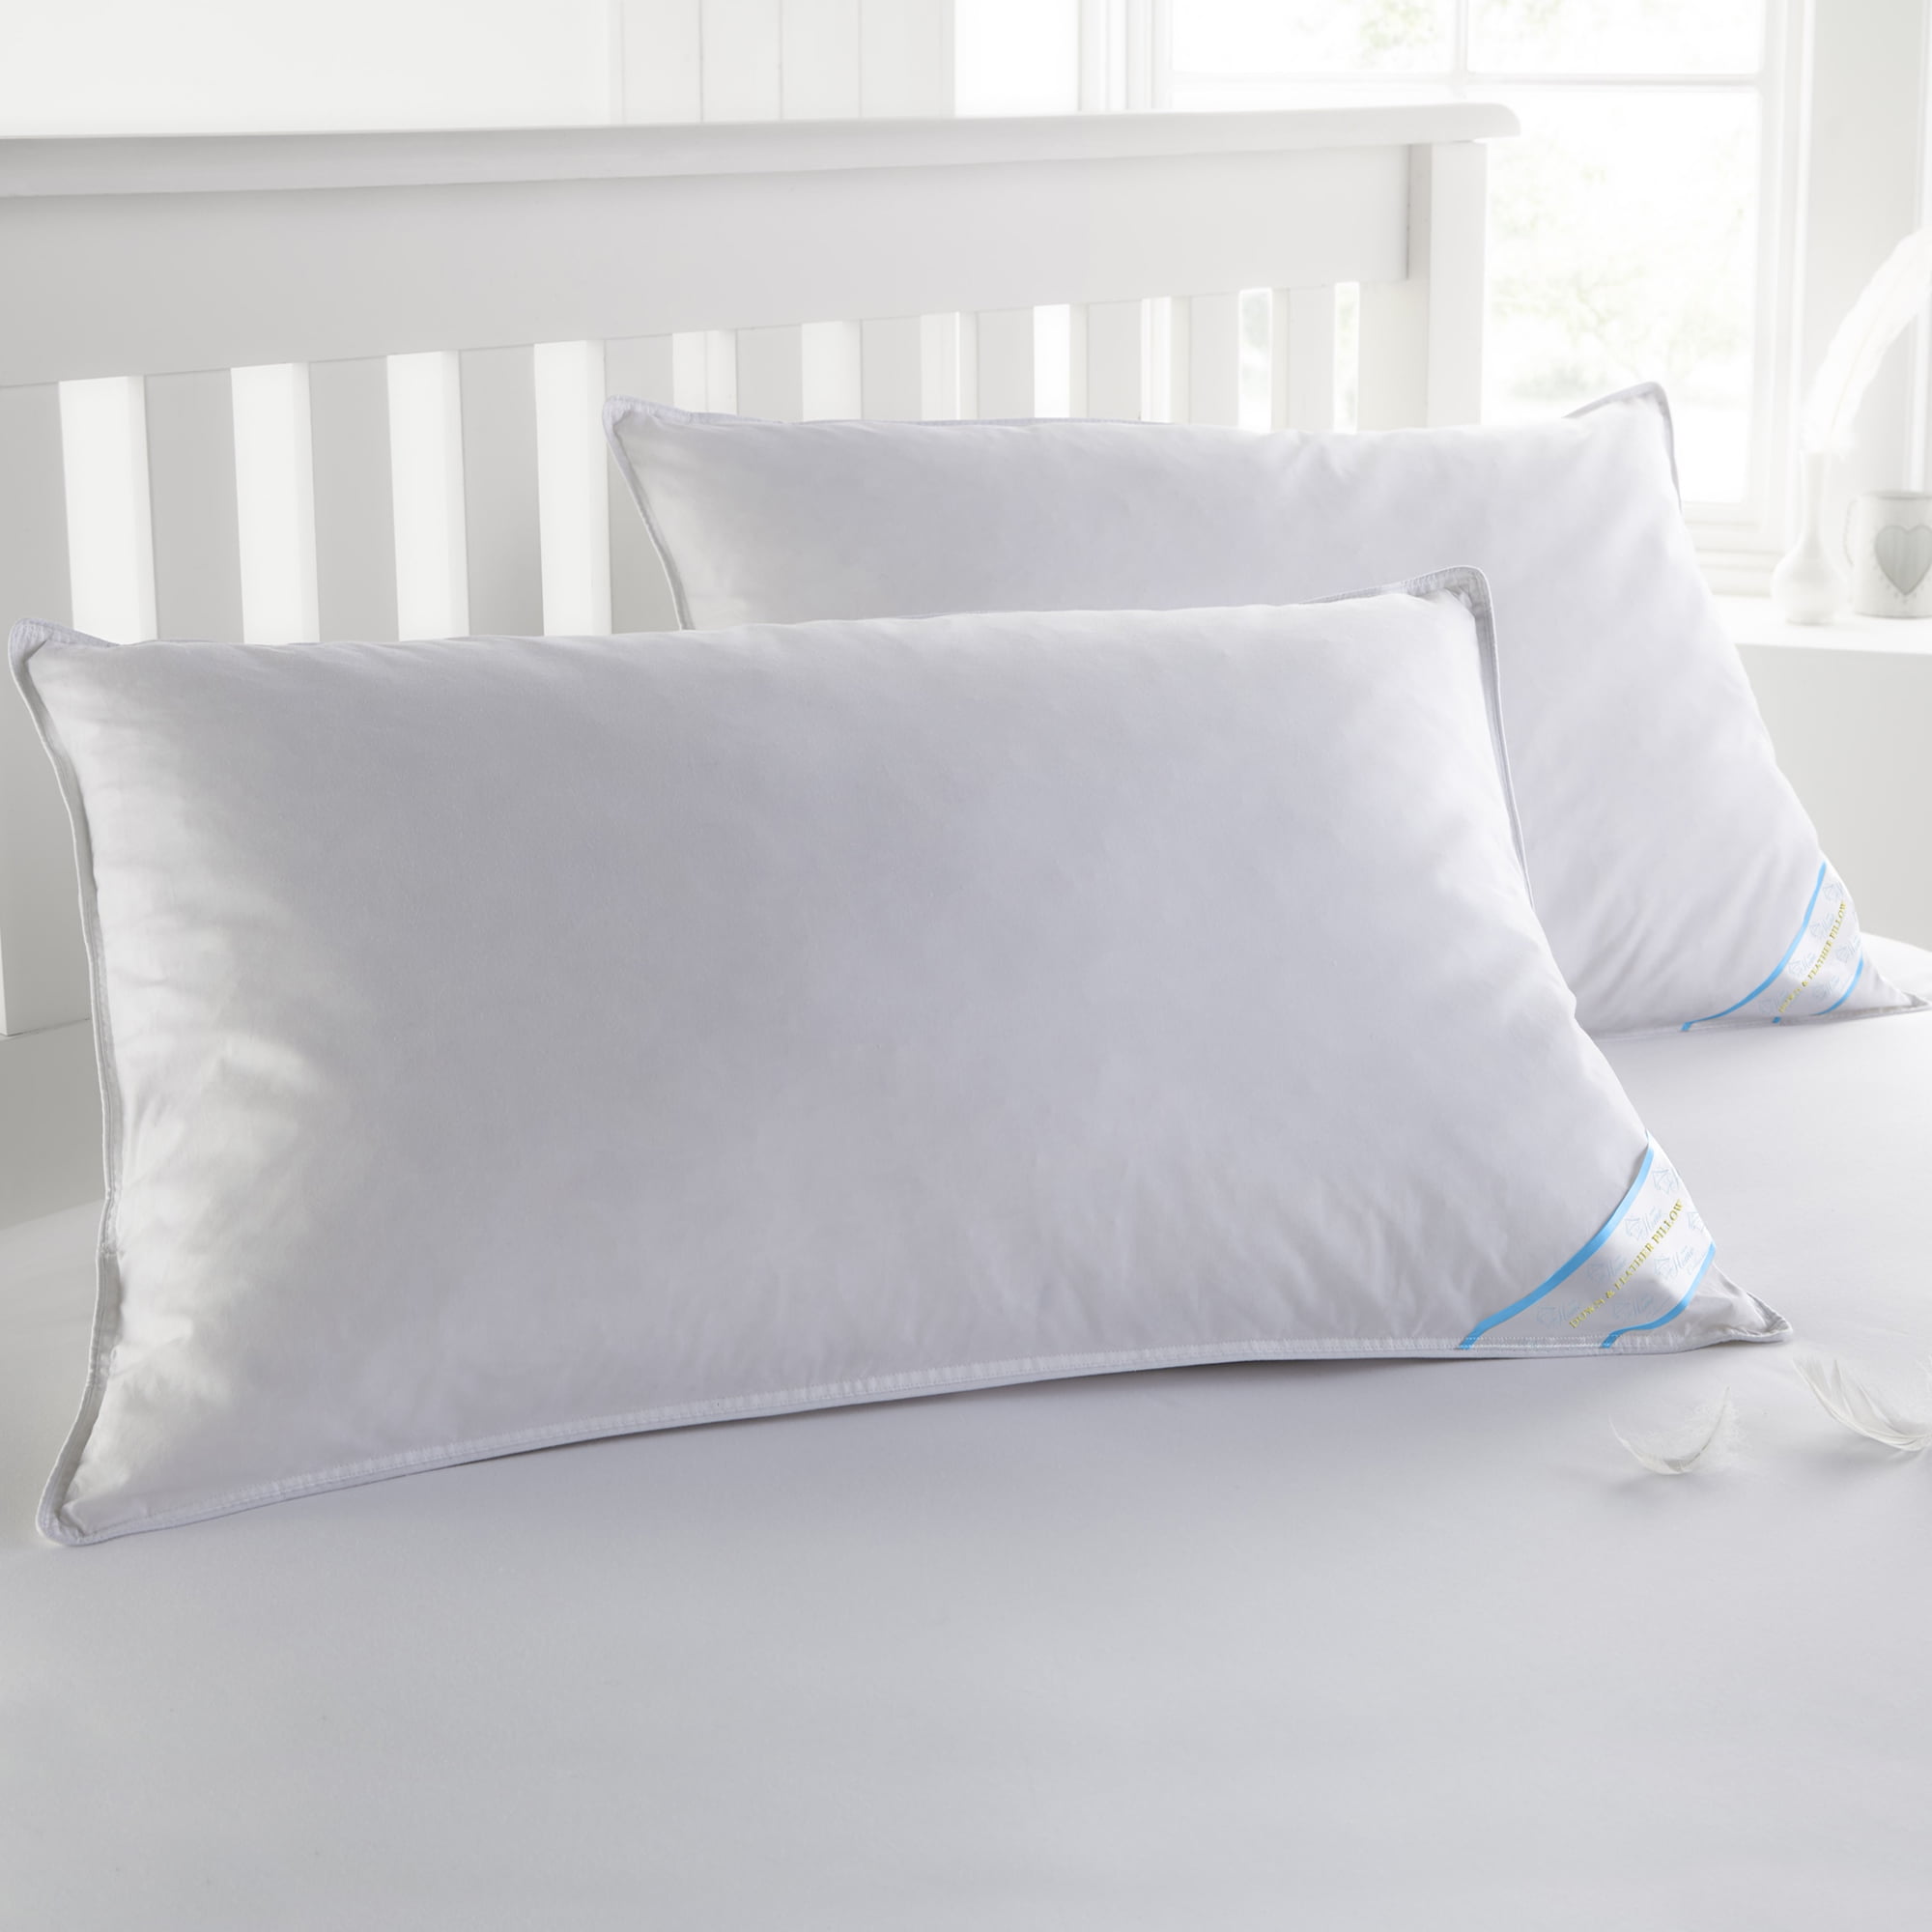 SET OF 2 WHITE SUPER SOFT COTTON FEATHER DOWN BED SLEEPING PILLOW GOOD COMFORT 